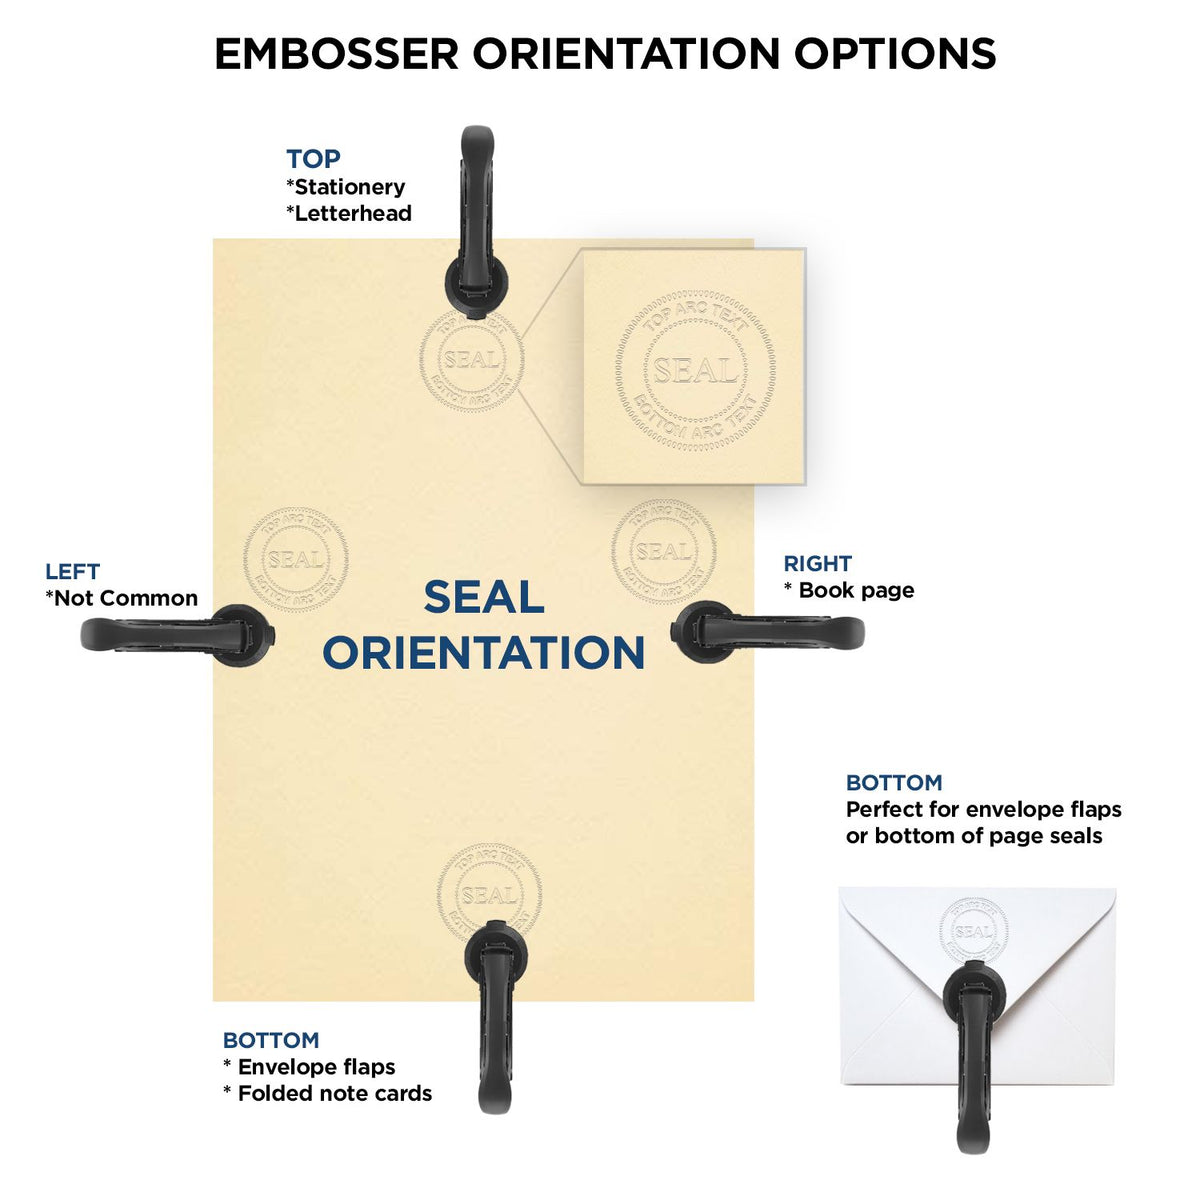 An infographic for the Heavy Duty Cast Iron Texas Geologist Seal Embosser showing embosser orientation, this is showing examples of a top, bottom, right and left insert.